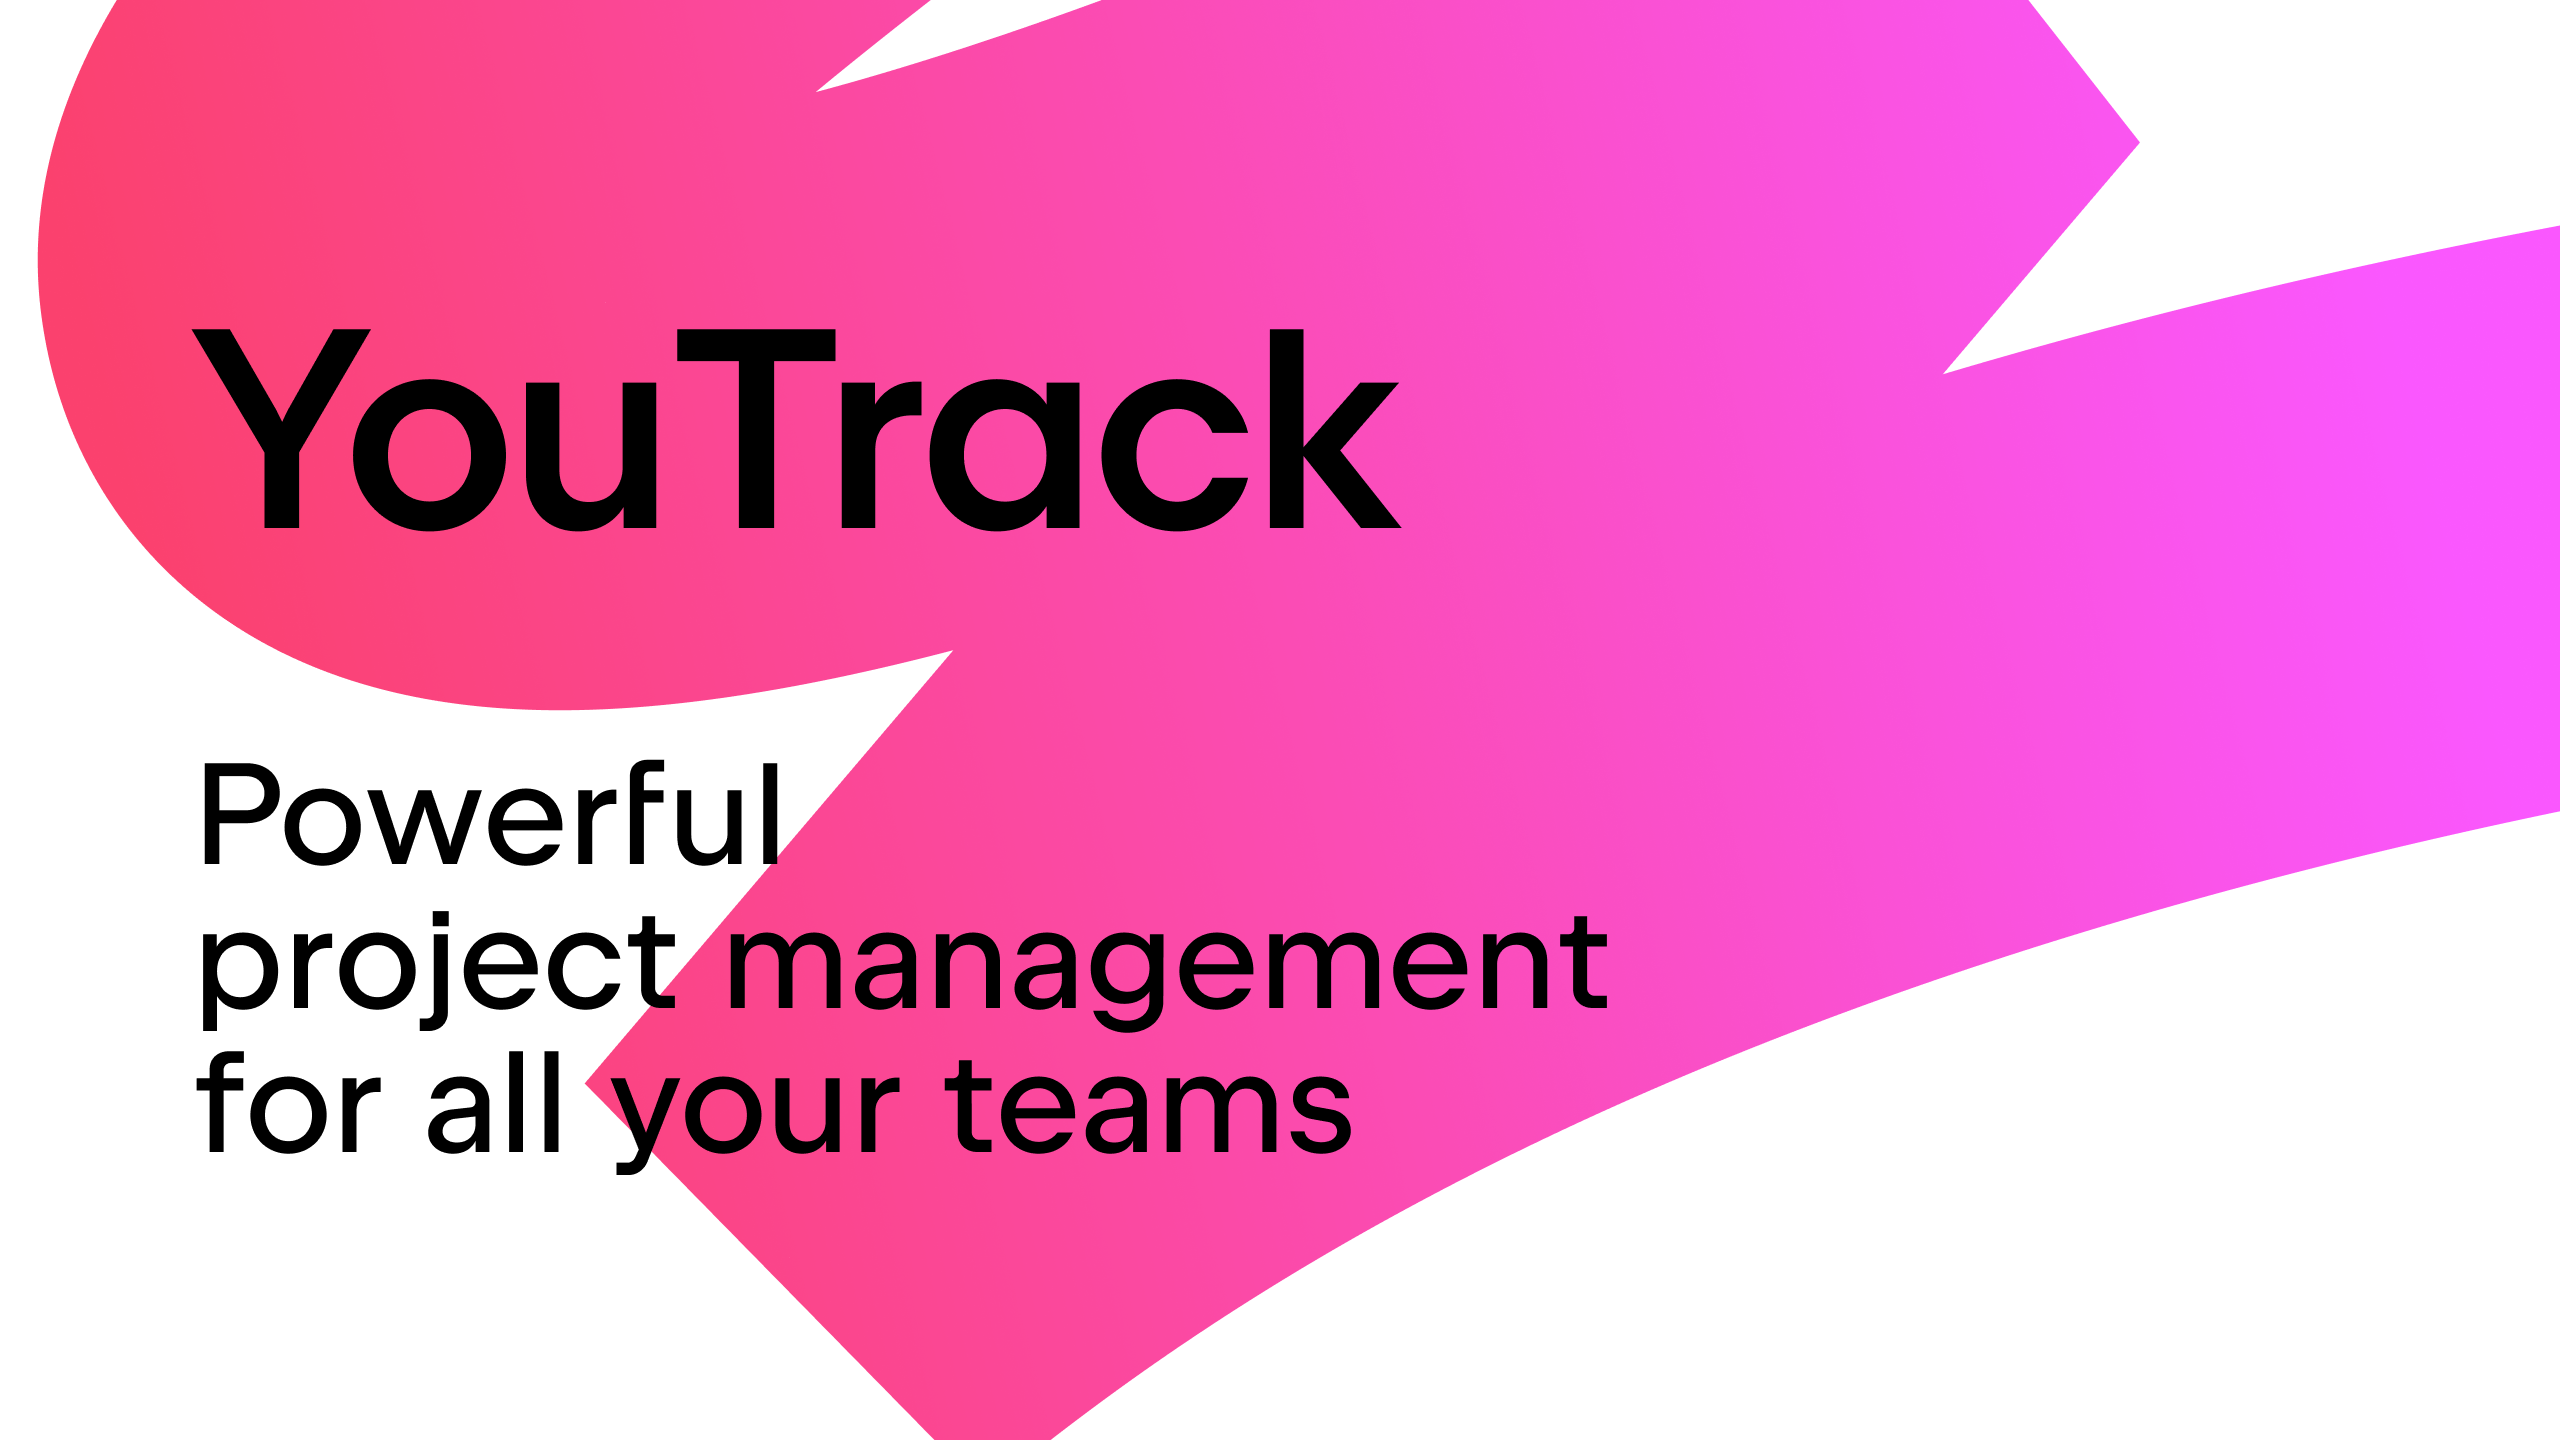 YouTrack: Project management for all your teams